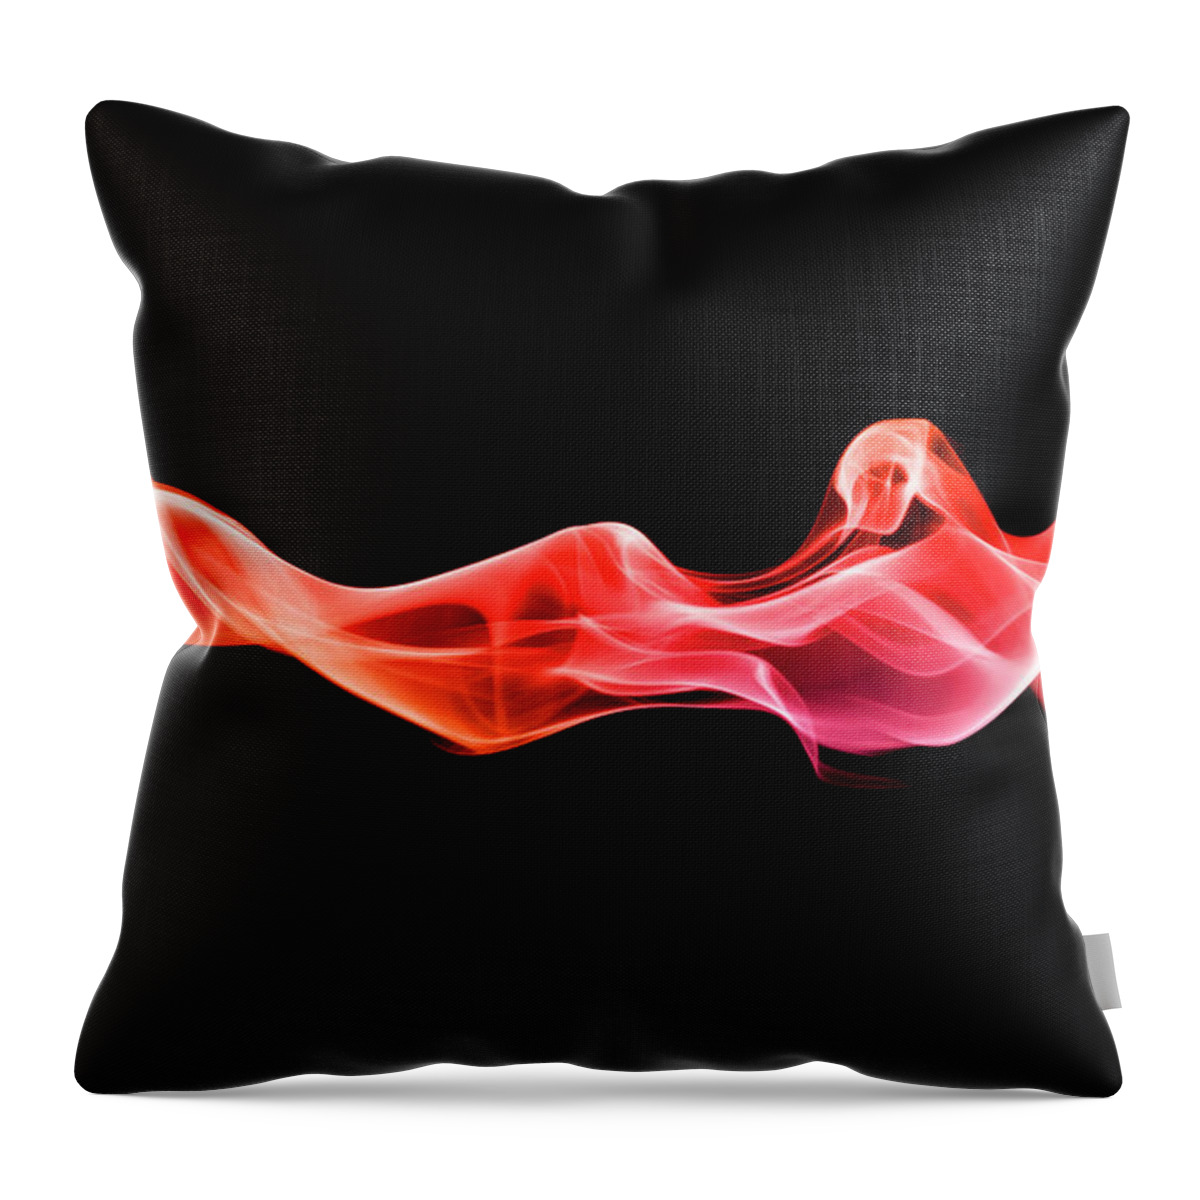 Orange Color Throw Pillow featuring the photograph Fiery Jet Of Red Smoke by Anthony Bradshaw